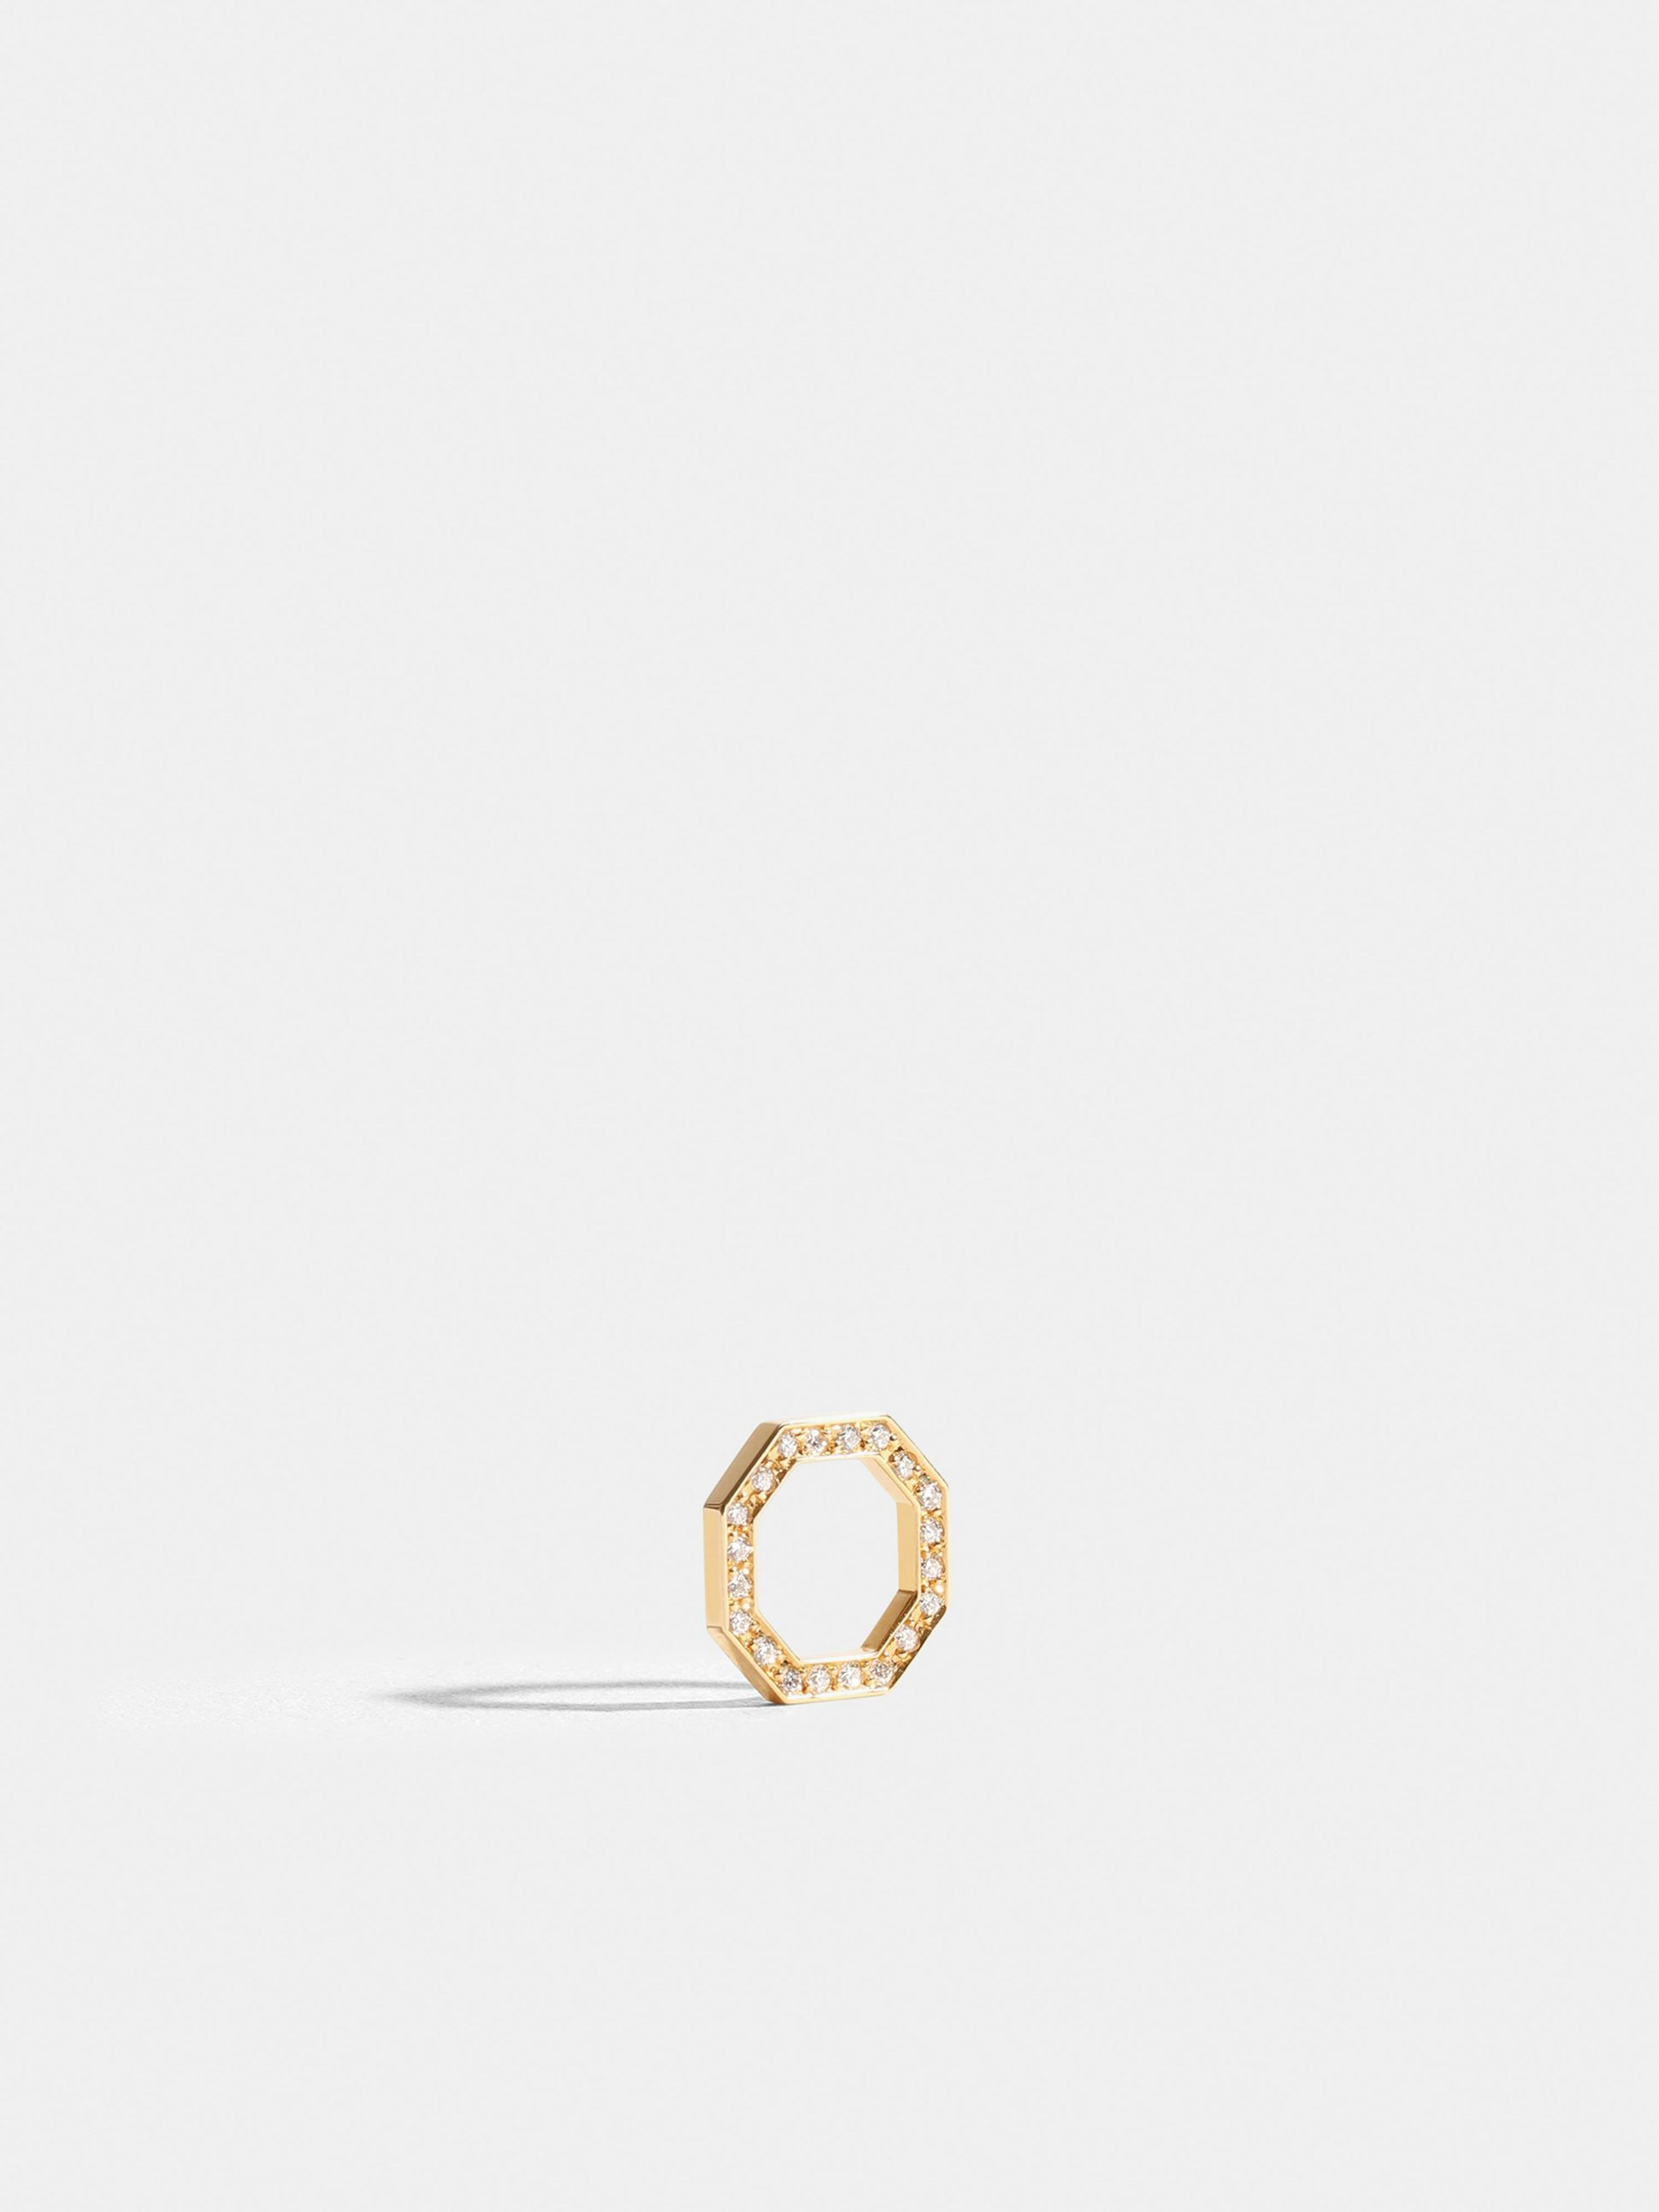 Octogone motif in 18k Fairmined ethical yellow gold, paved with lab-grown diamonds, on a bright orange cord.